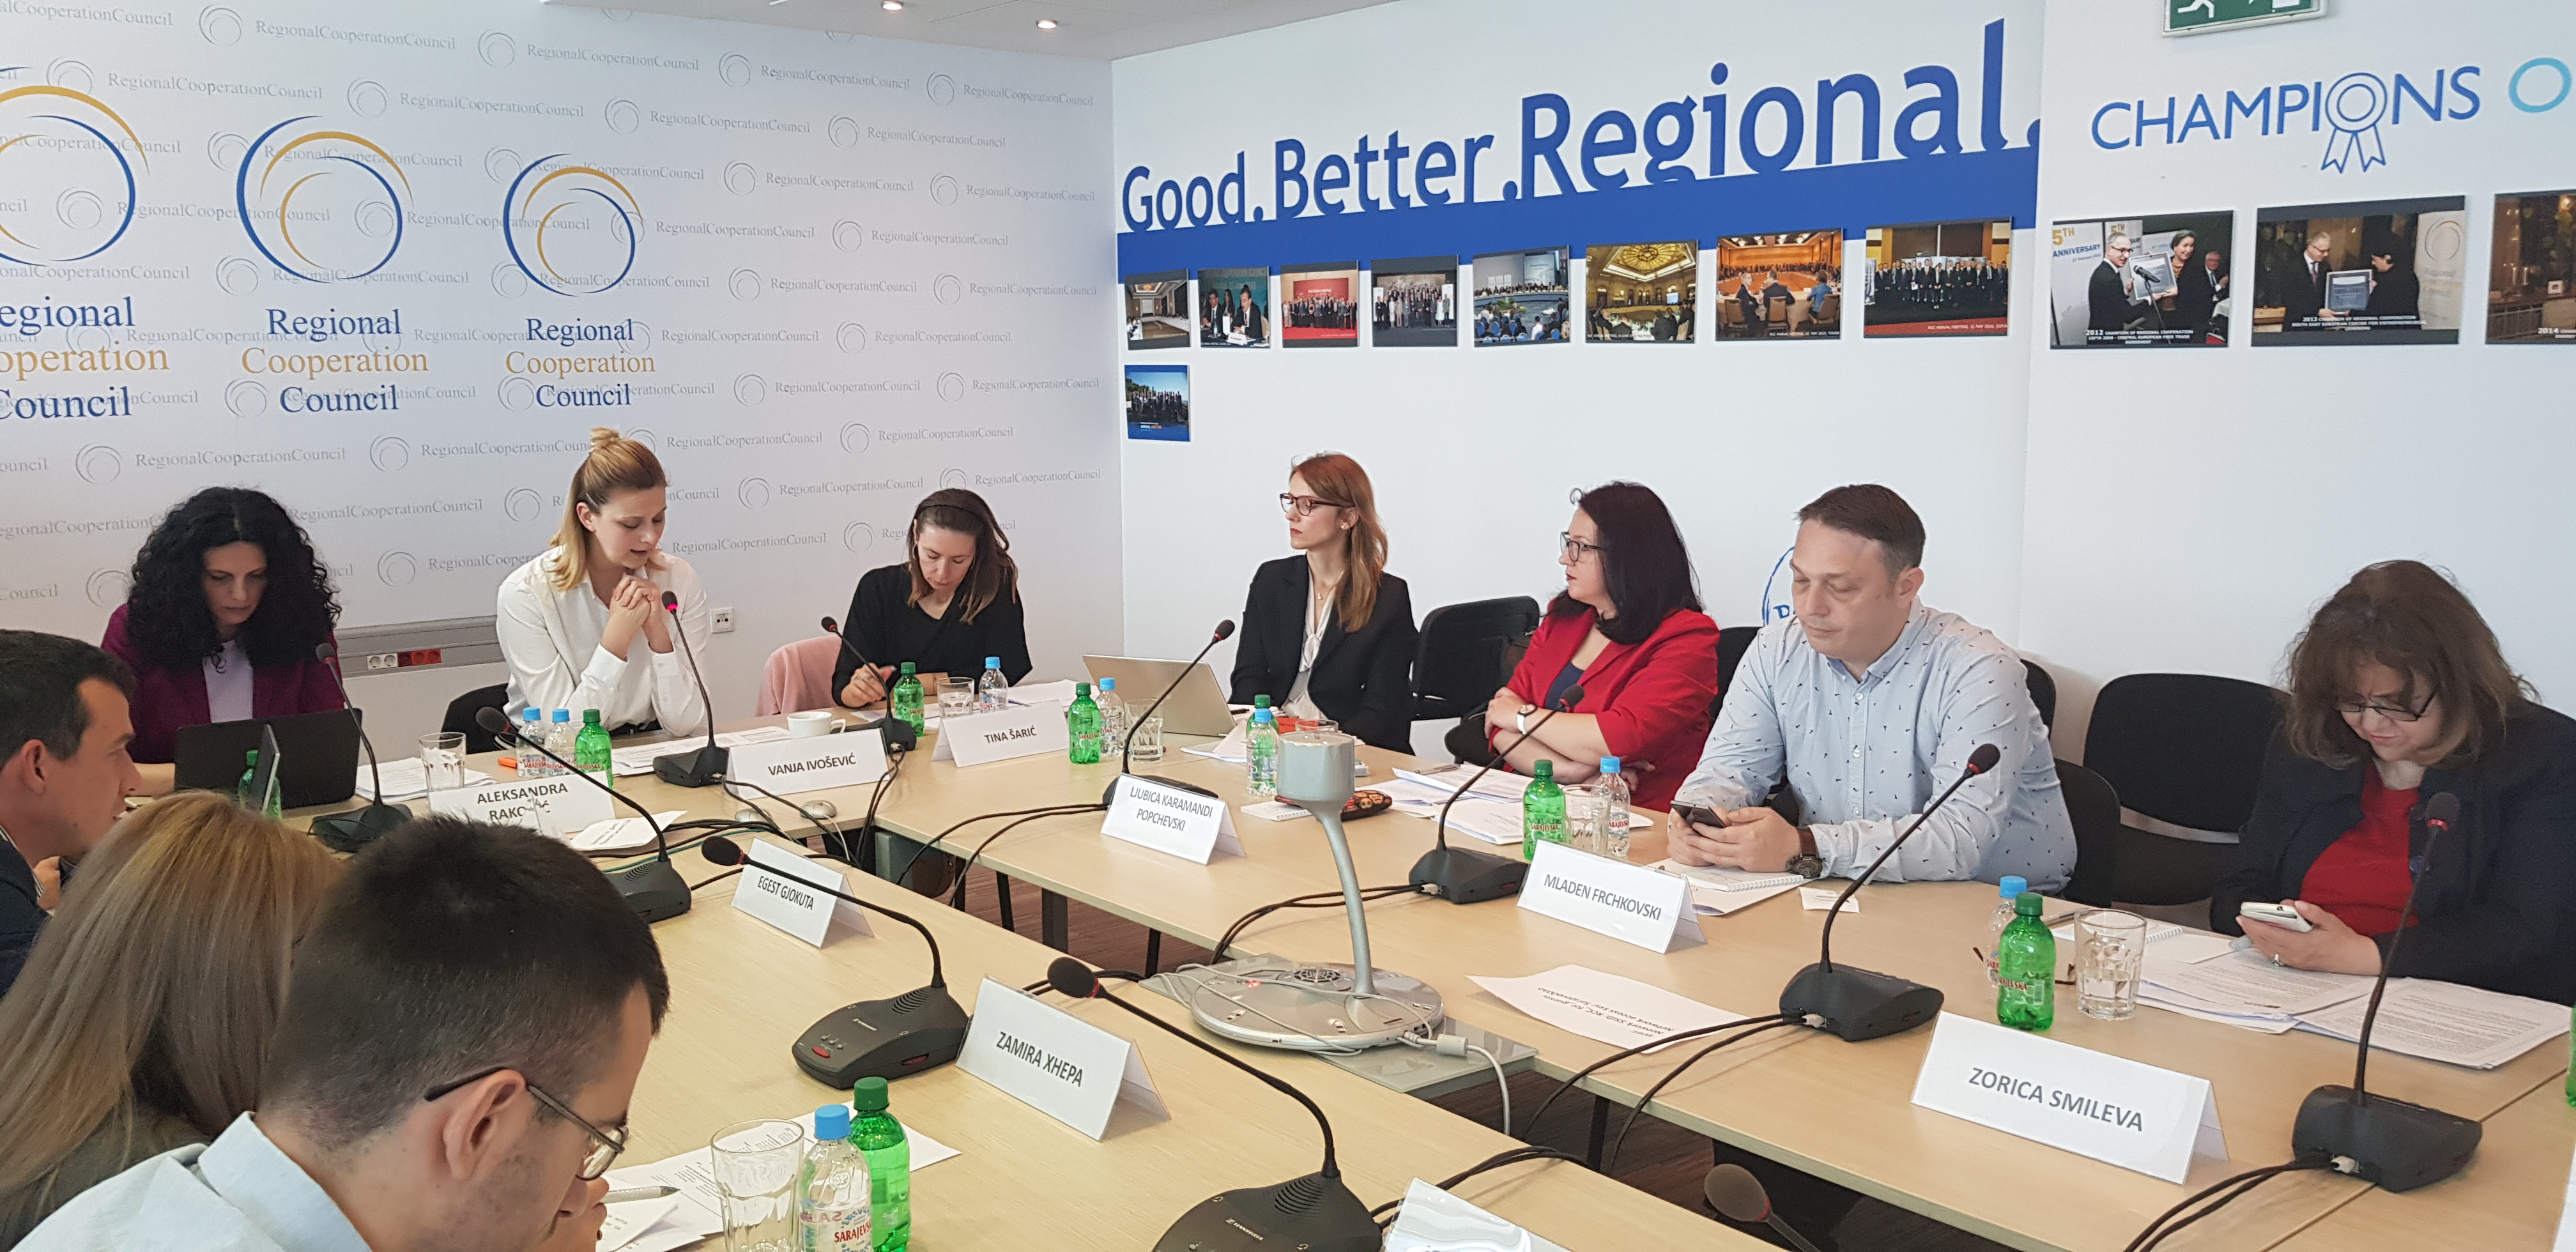 Joint Working Group on Mutual Recognition of Professional Qualifications (JWG on MRPQ) at themeeting held in the Regional Cooperation Council (RCC) headquarters in Sarajevo on 7 May 2018 (Photo: RCC/Alma Arslanagic Pozder)